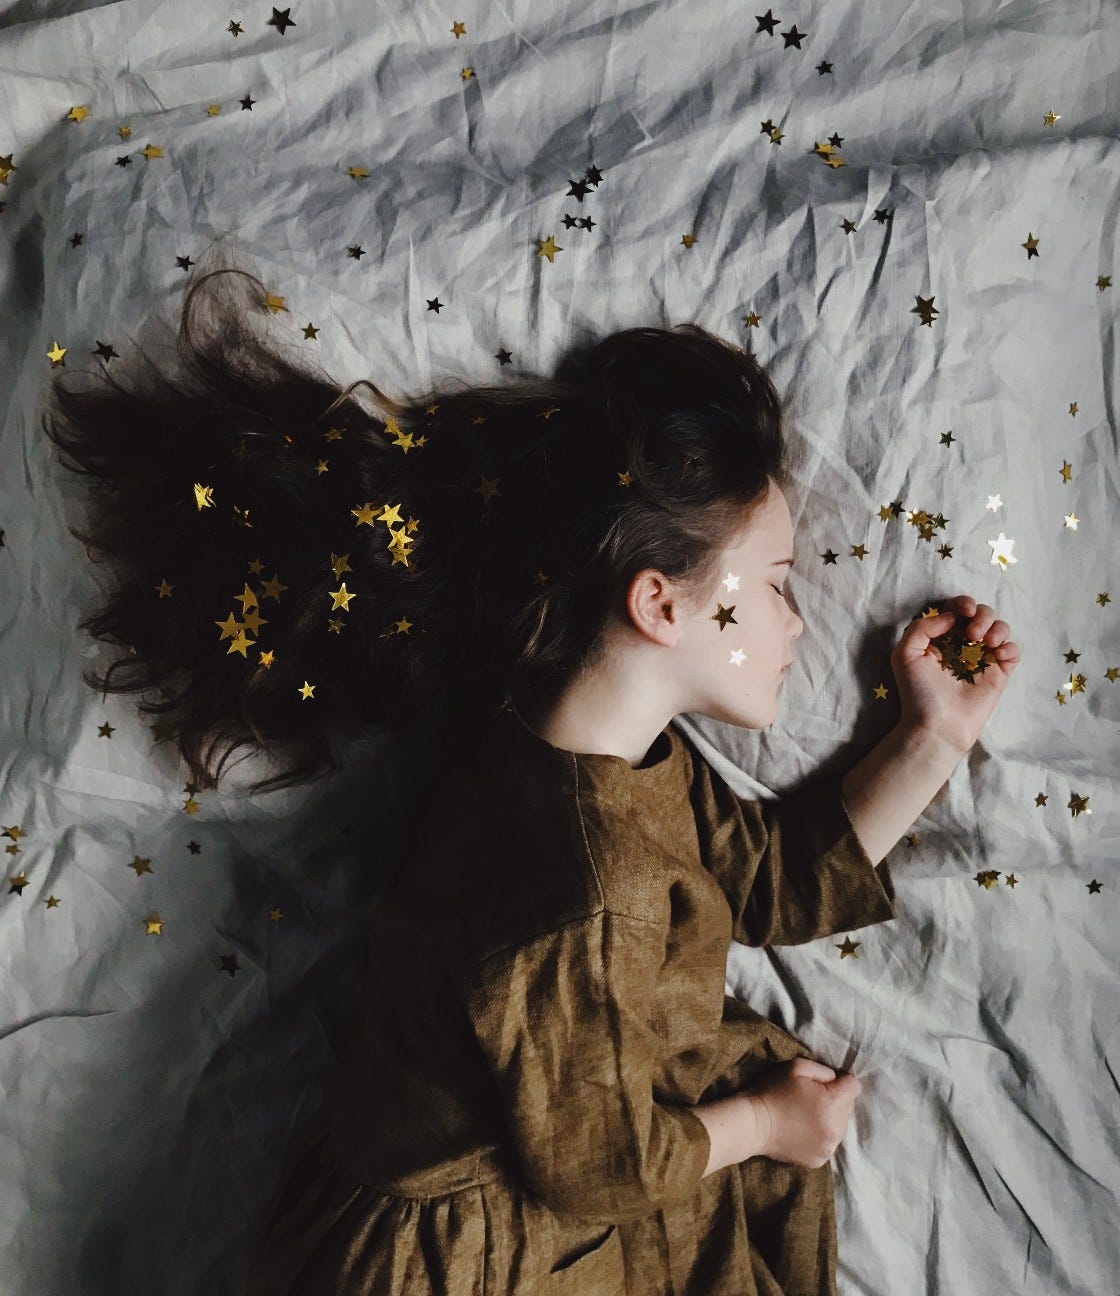 a young girl with long brown hair in a tan dress sleeps on a wrinkled muslin sheet. Small gold stars are sprinkled through her hair and on the sheet, and she holds some in one hand.